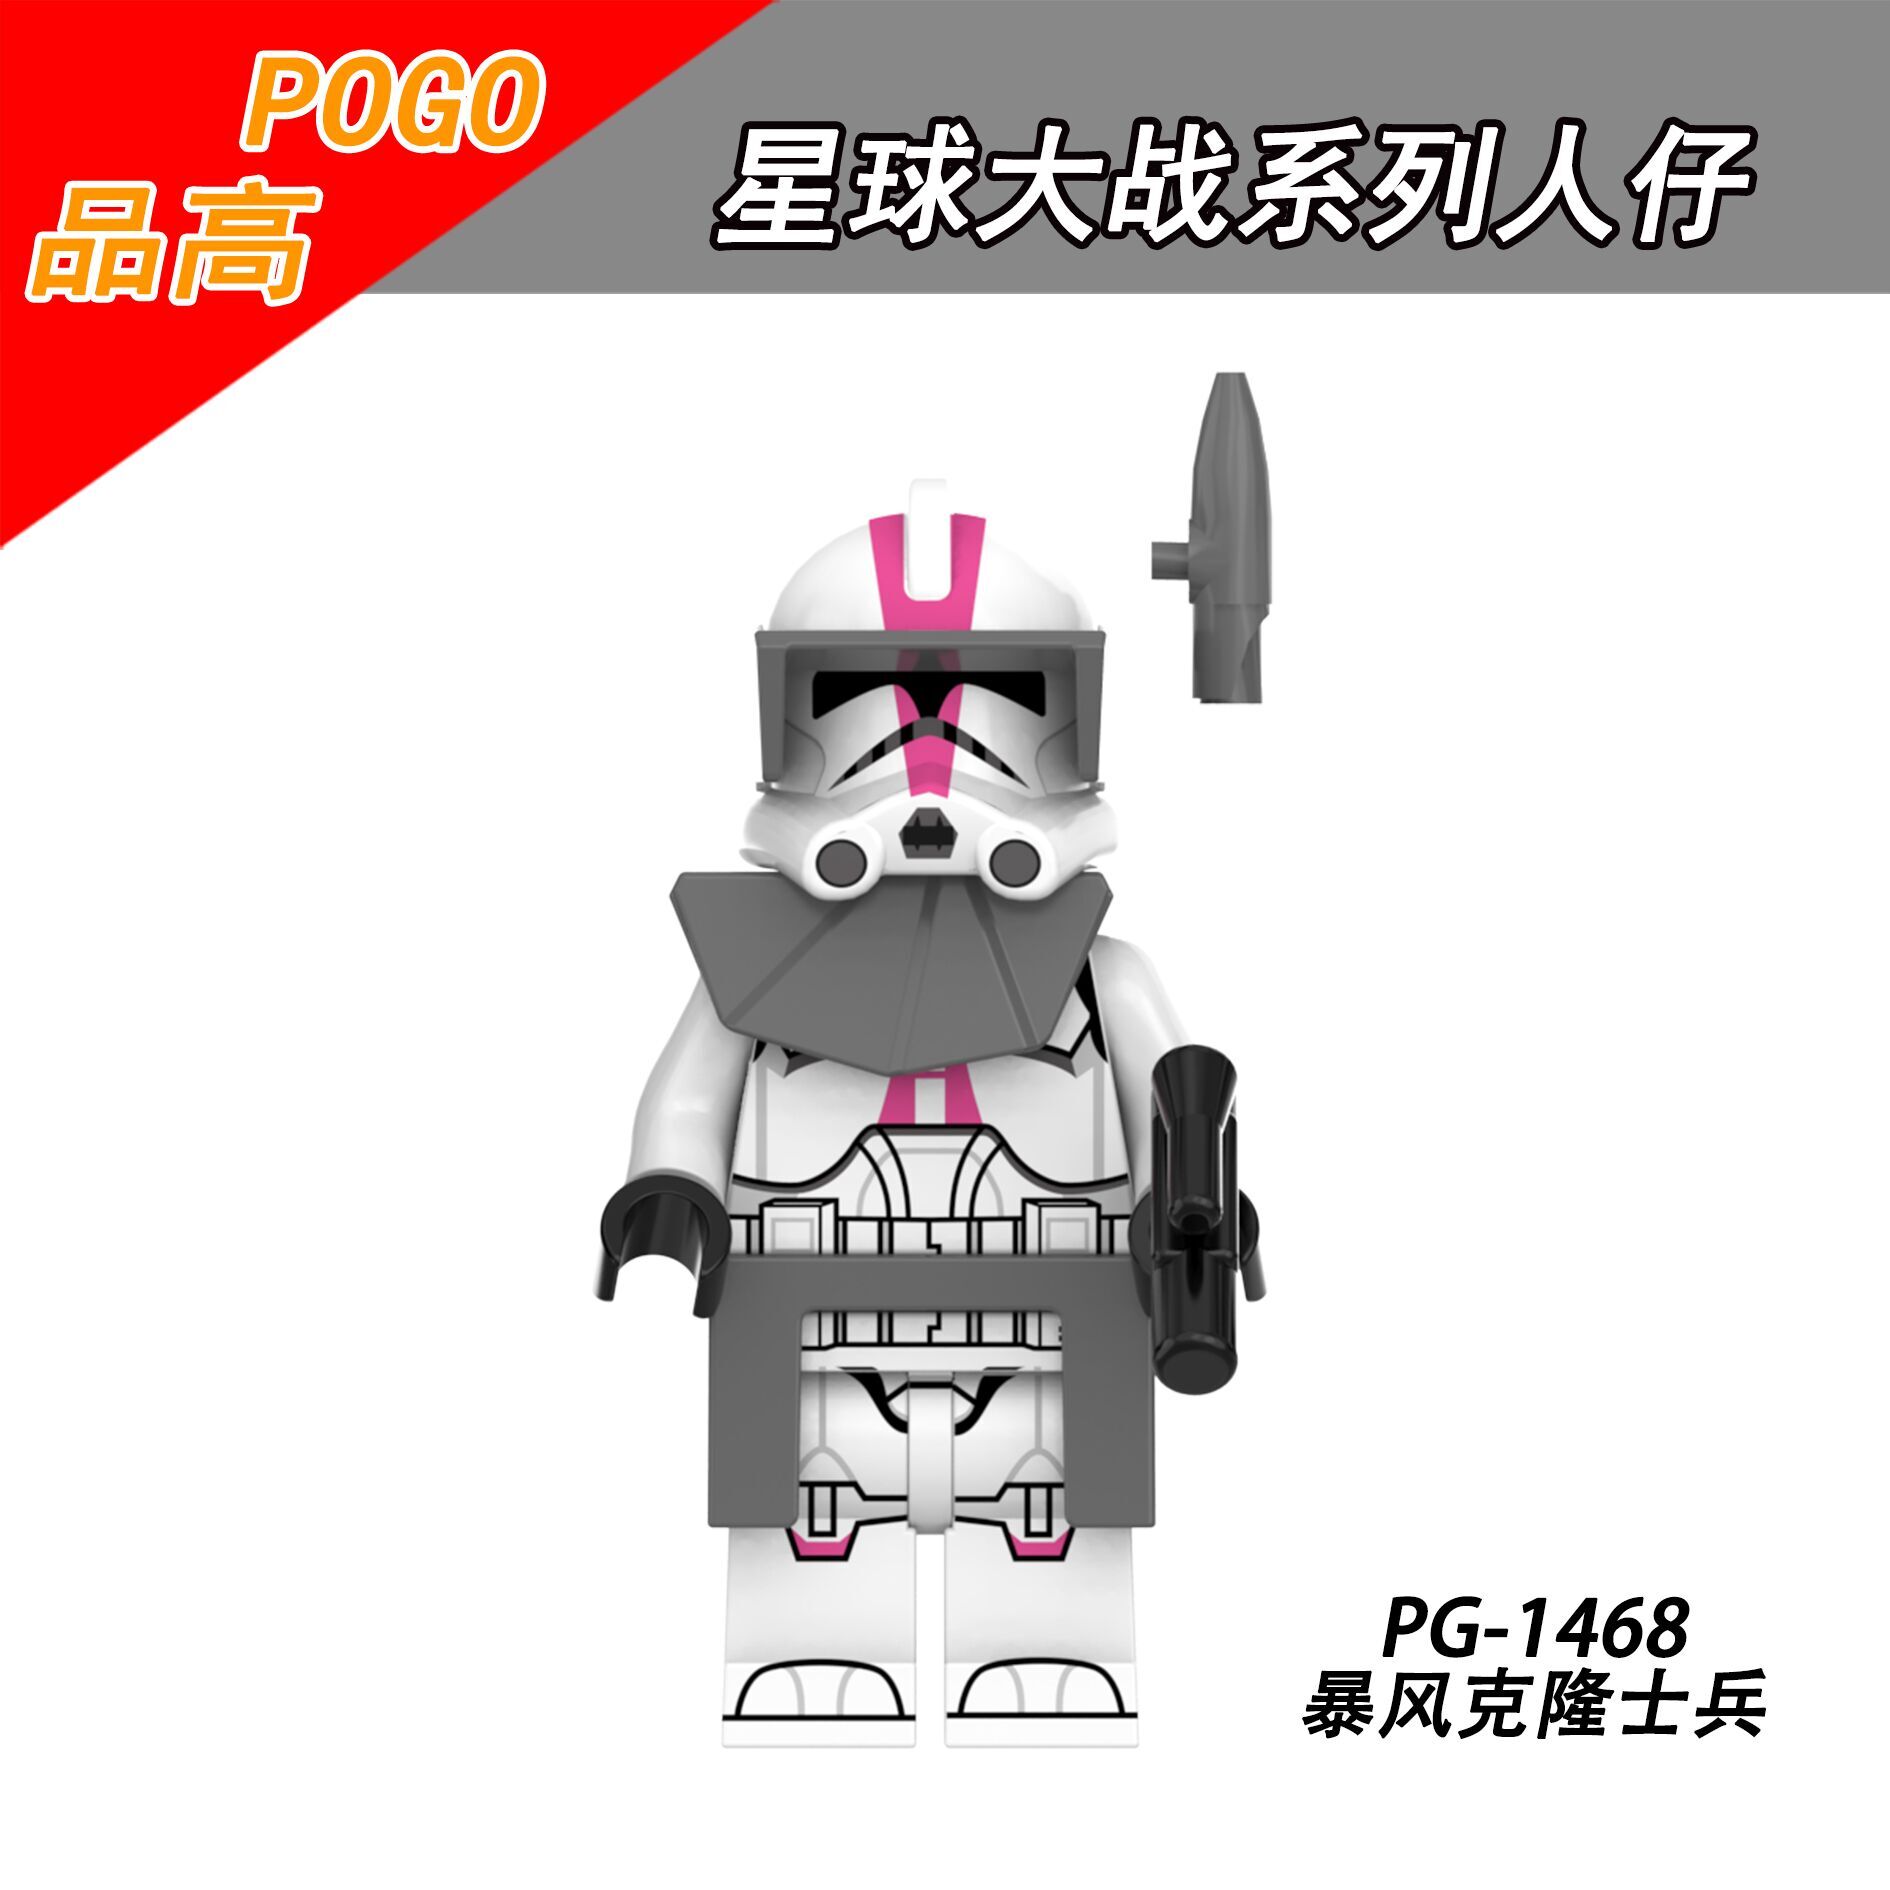 PG1465 PG1466 PG1467 PG1468 PG1469 PG1470 PG1471 PG1472 PG8294 Star Wars Clone Strooper Building Blocks Bricks Movie Series Action Educational Toys for Kids Gifts 